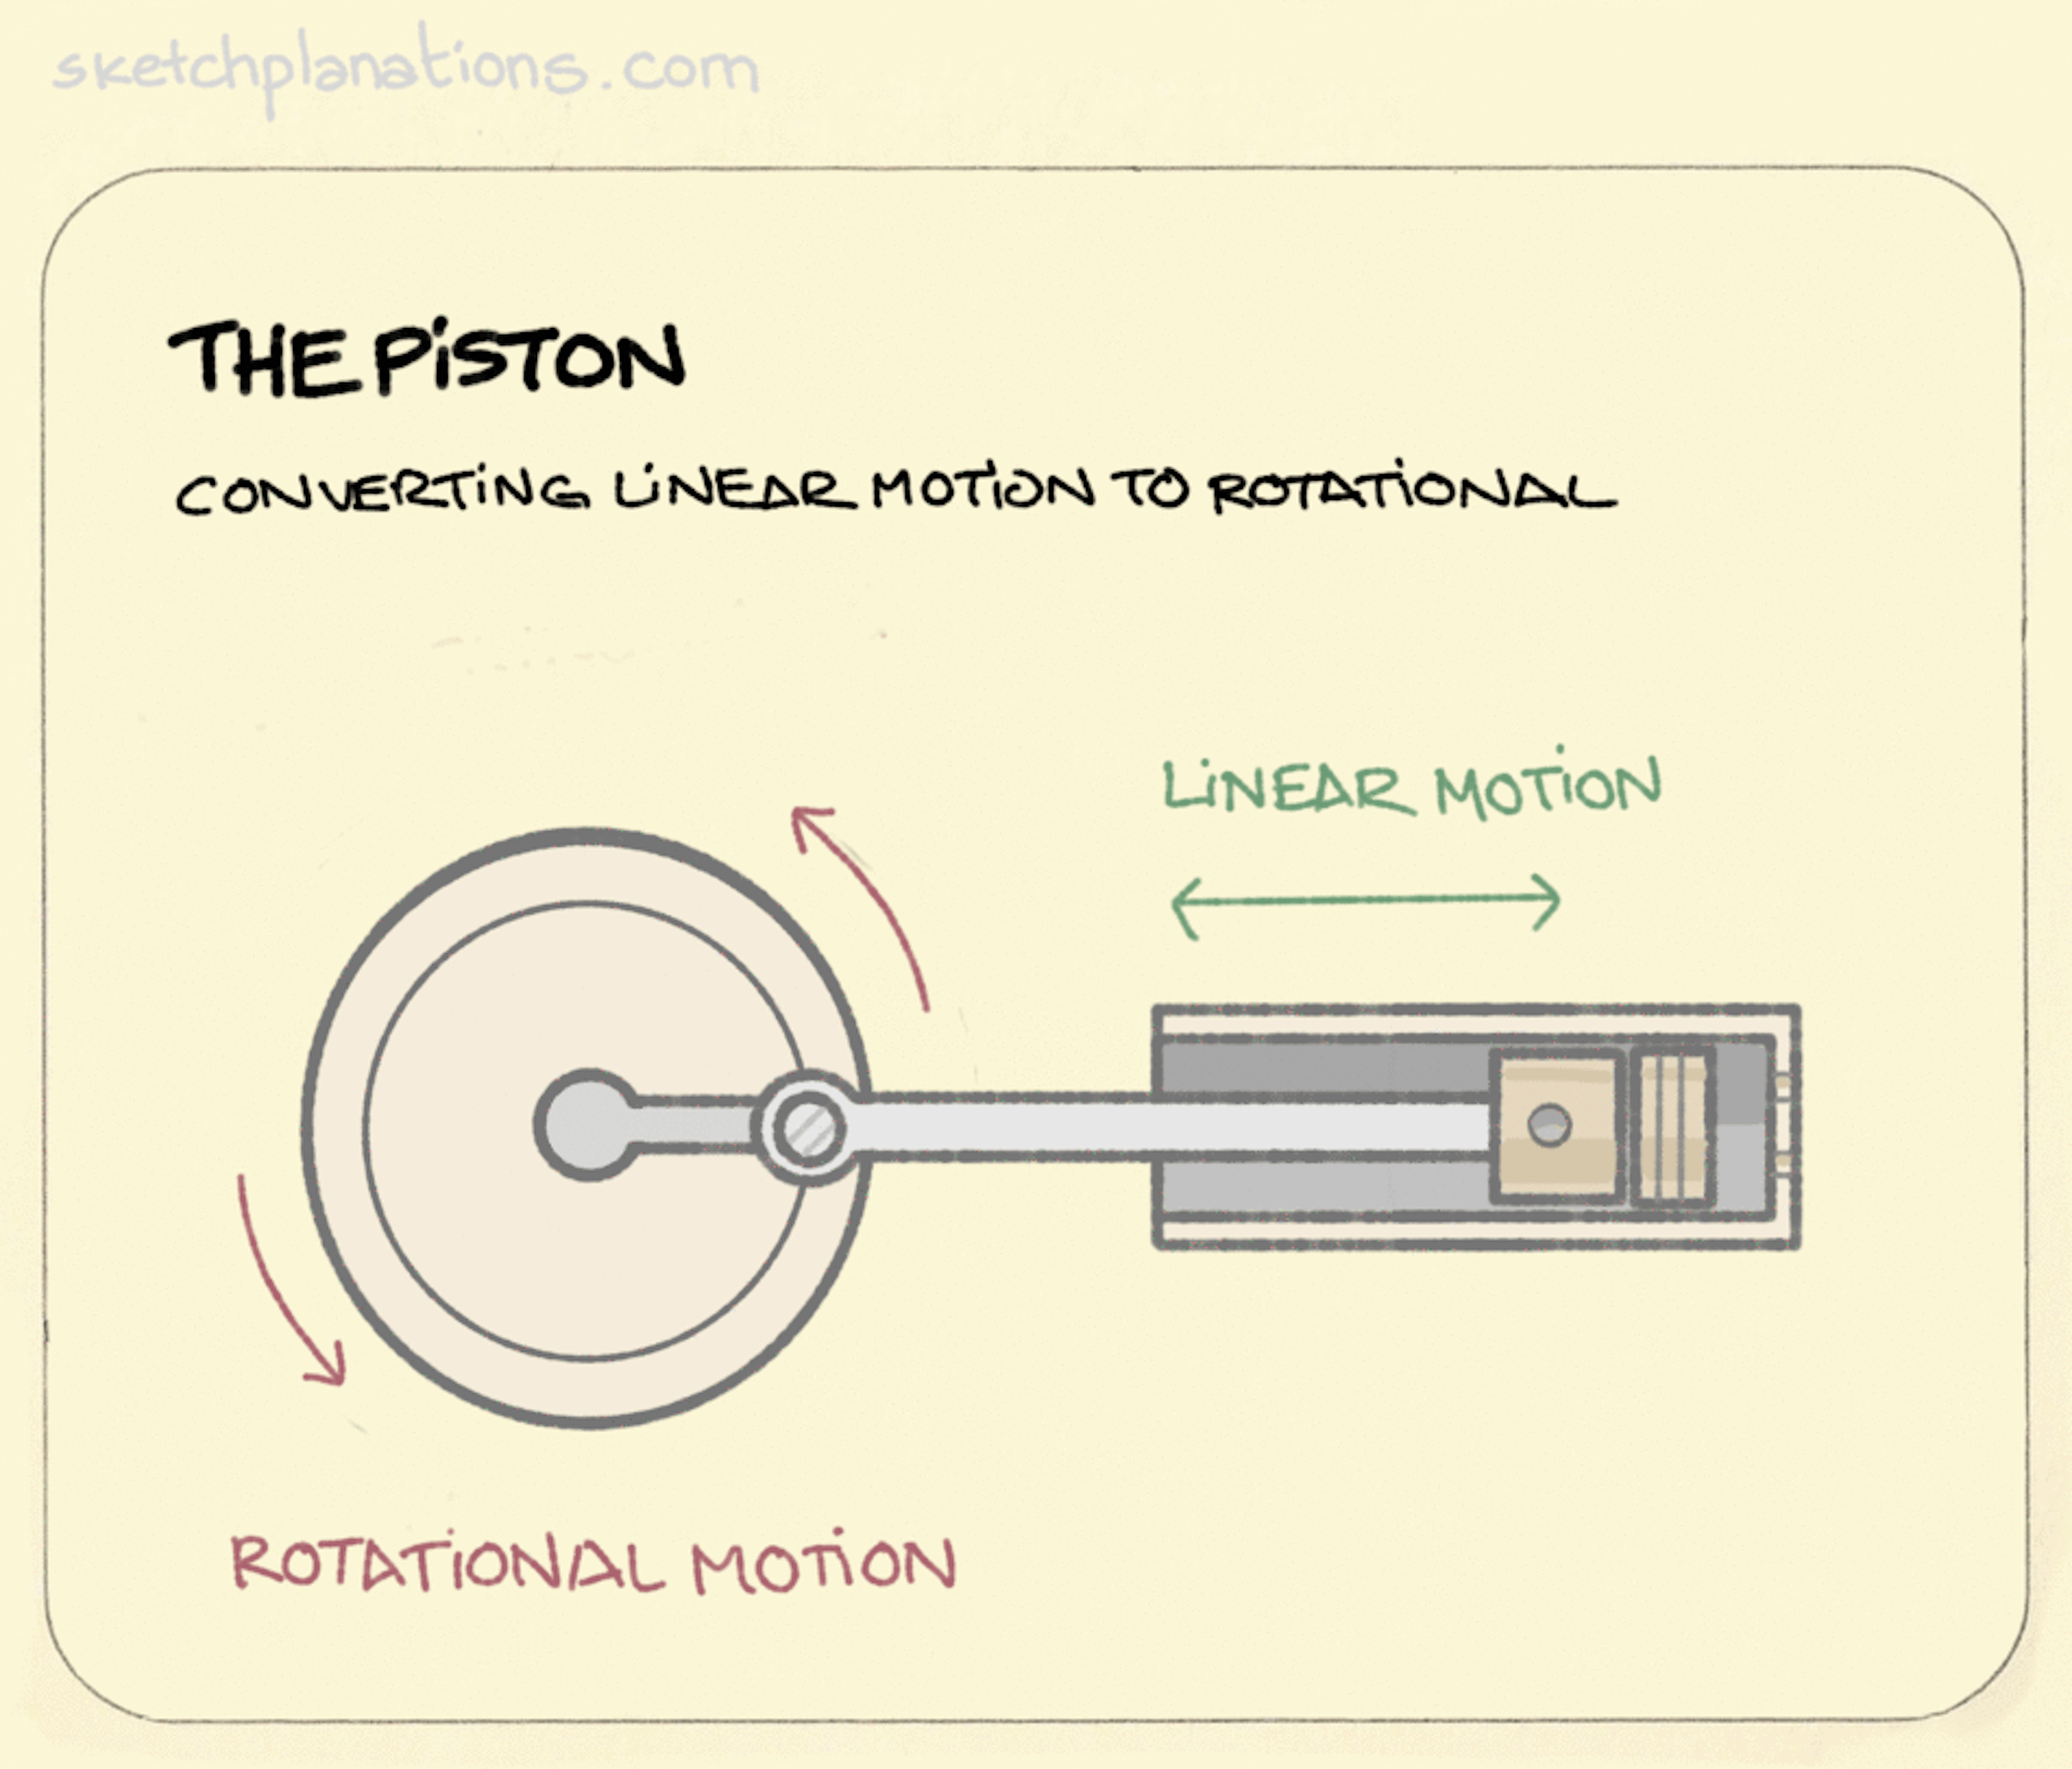 The piston animation: a short animation of a piston with connecting rod and crankshaft showing how it converts linear motion—back and forth—into rotational motion